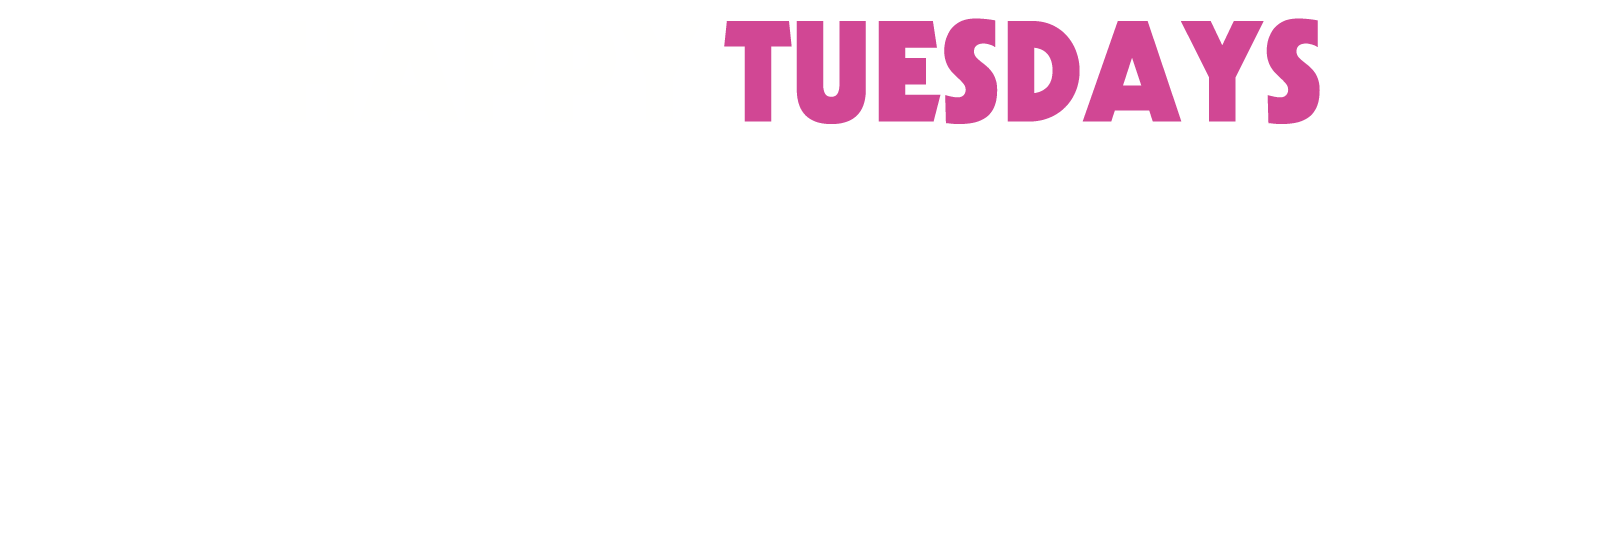 happy-tuesday-banner-design2.png